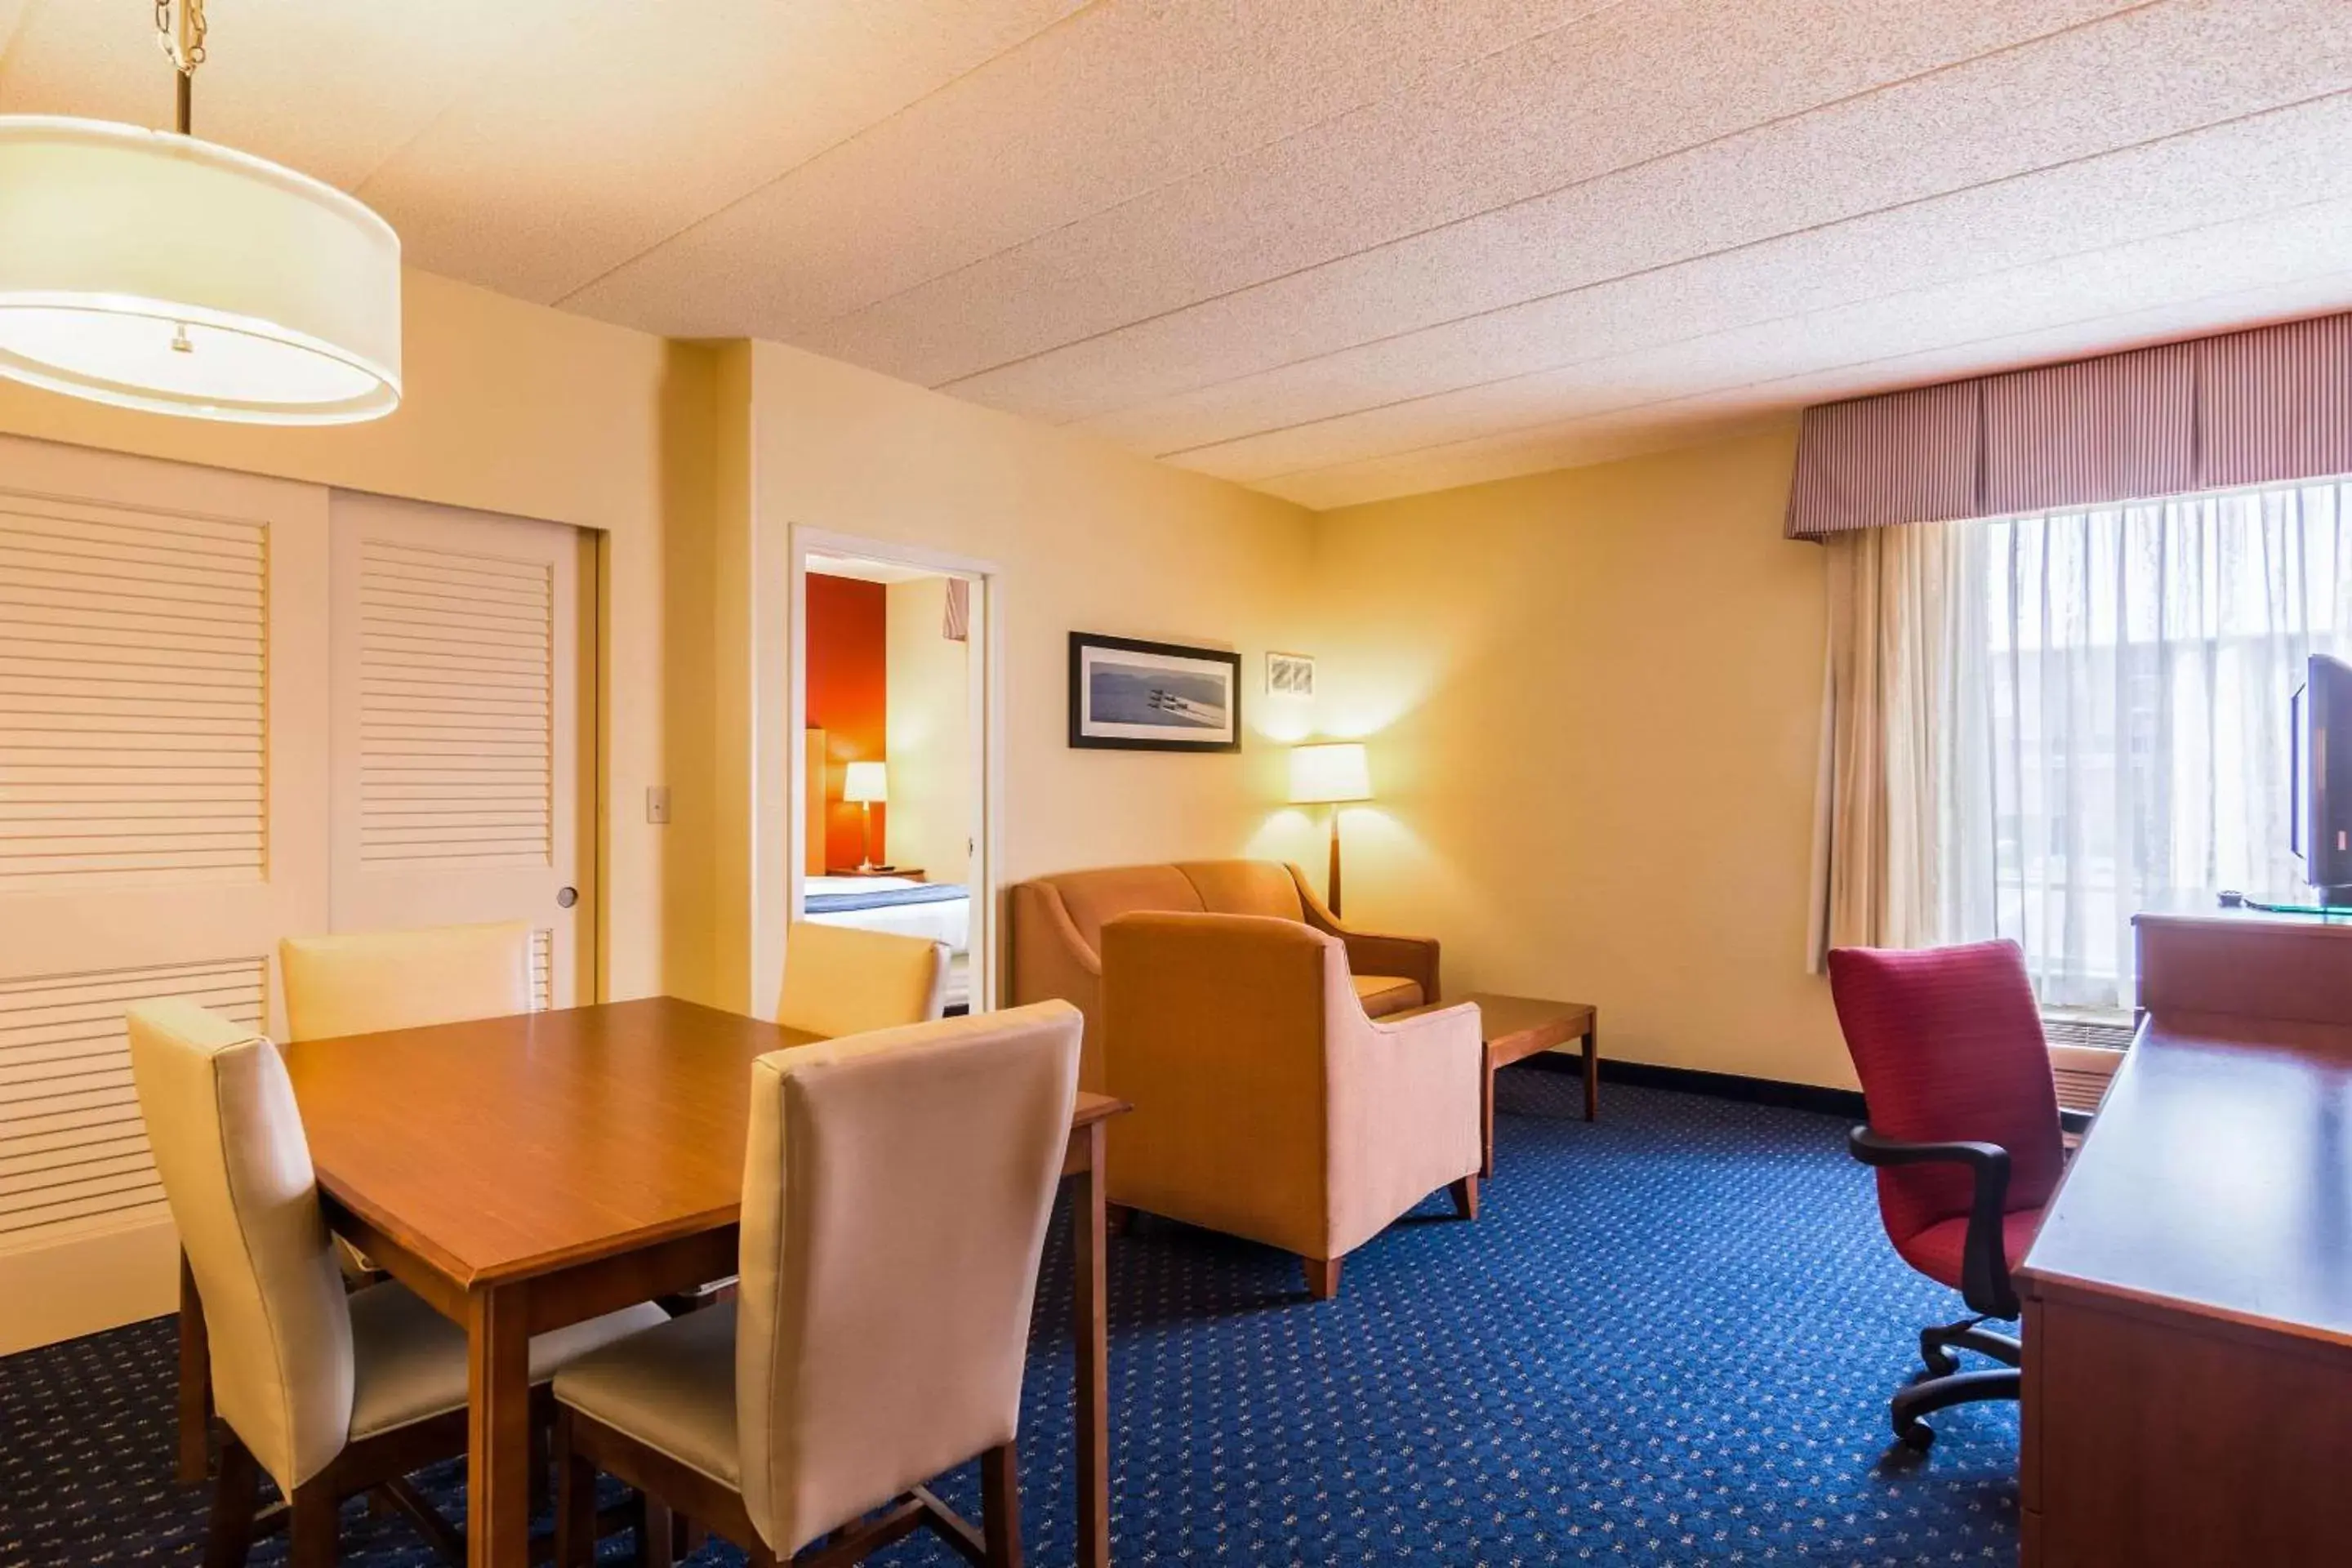 Photo of the whole room in Comfort Inn Washington DC Joint Andrews AFB